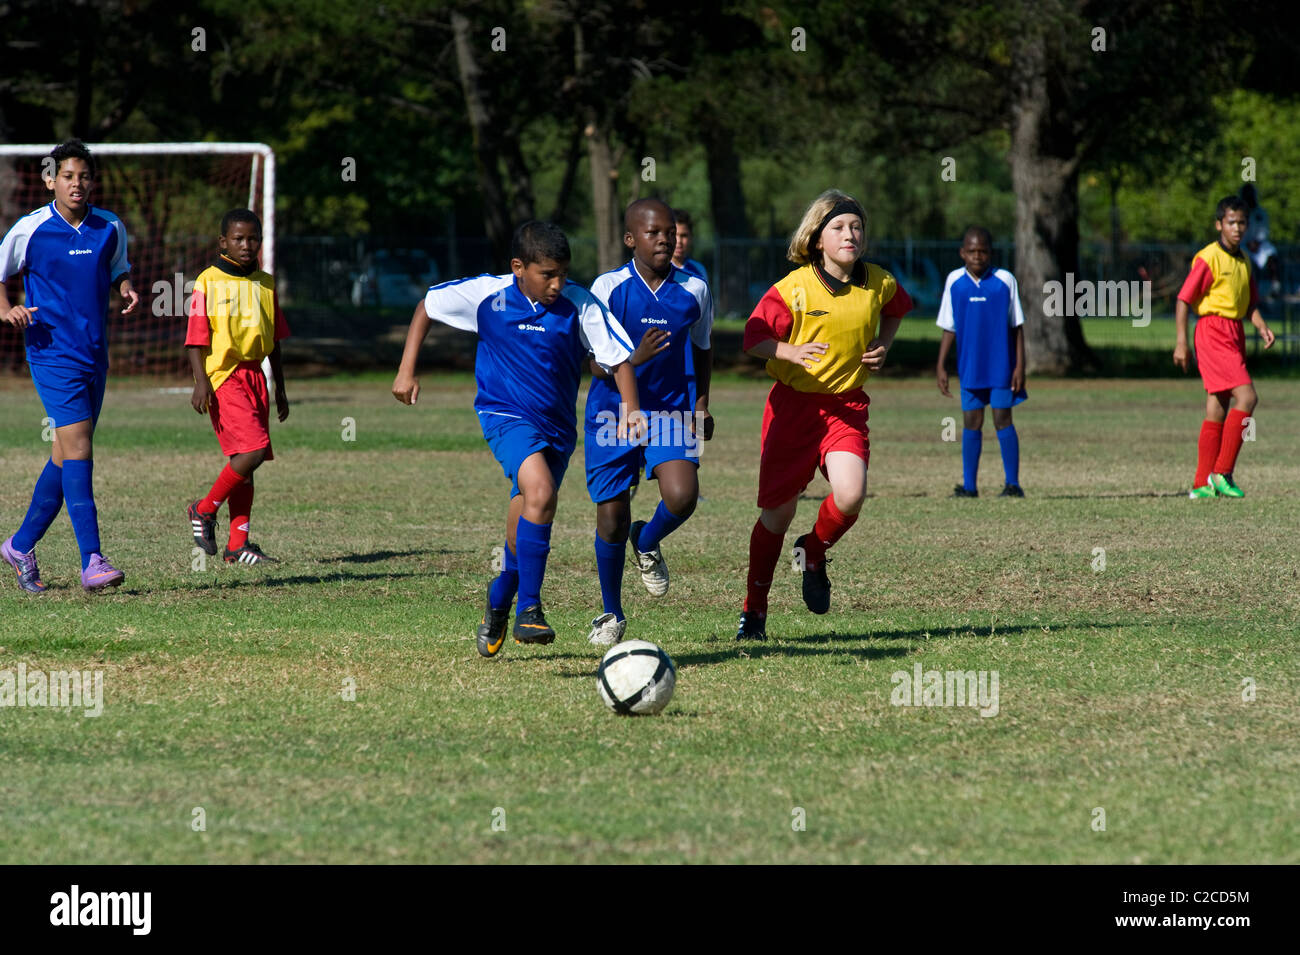 Boys under 13 team play a soccer match, Cape Town, South Africa Stock Photo